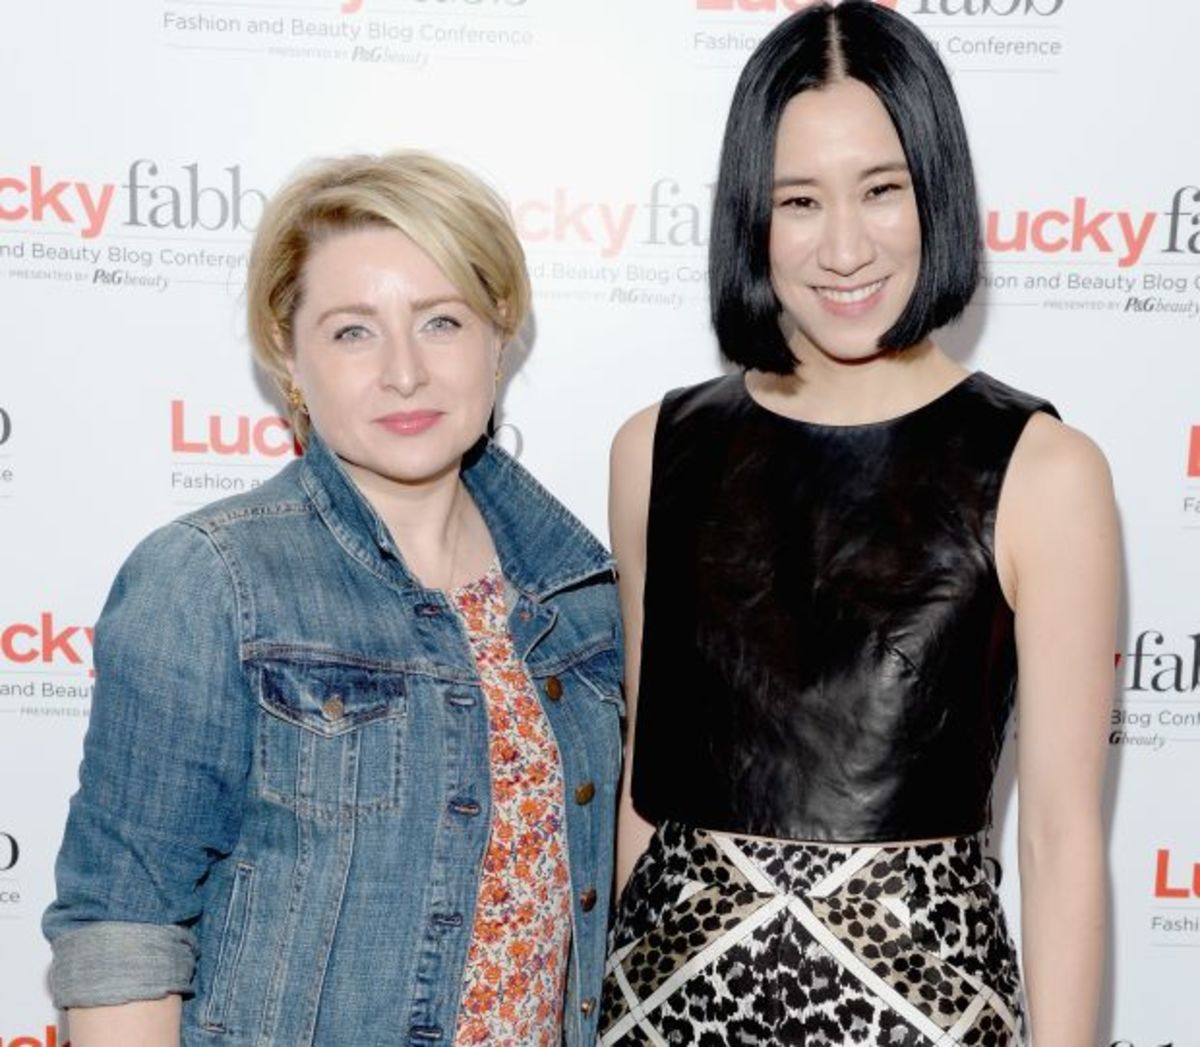 The Lucky Group President Gillian Gorman Round and Chief Creative Officer Eva Chen in April. Photo: Michael Kovac/Getty Images for Lucky